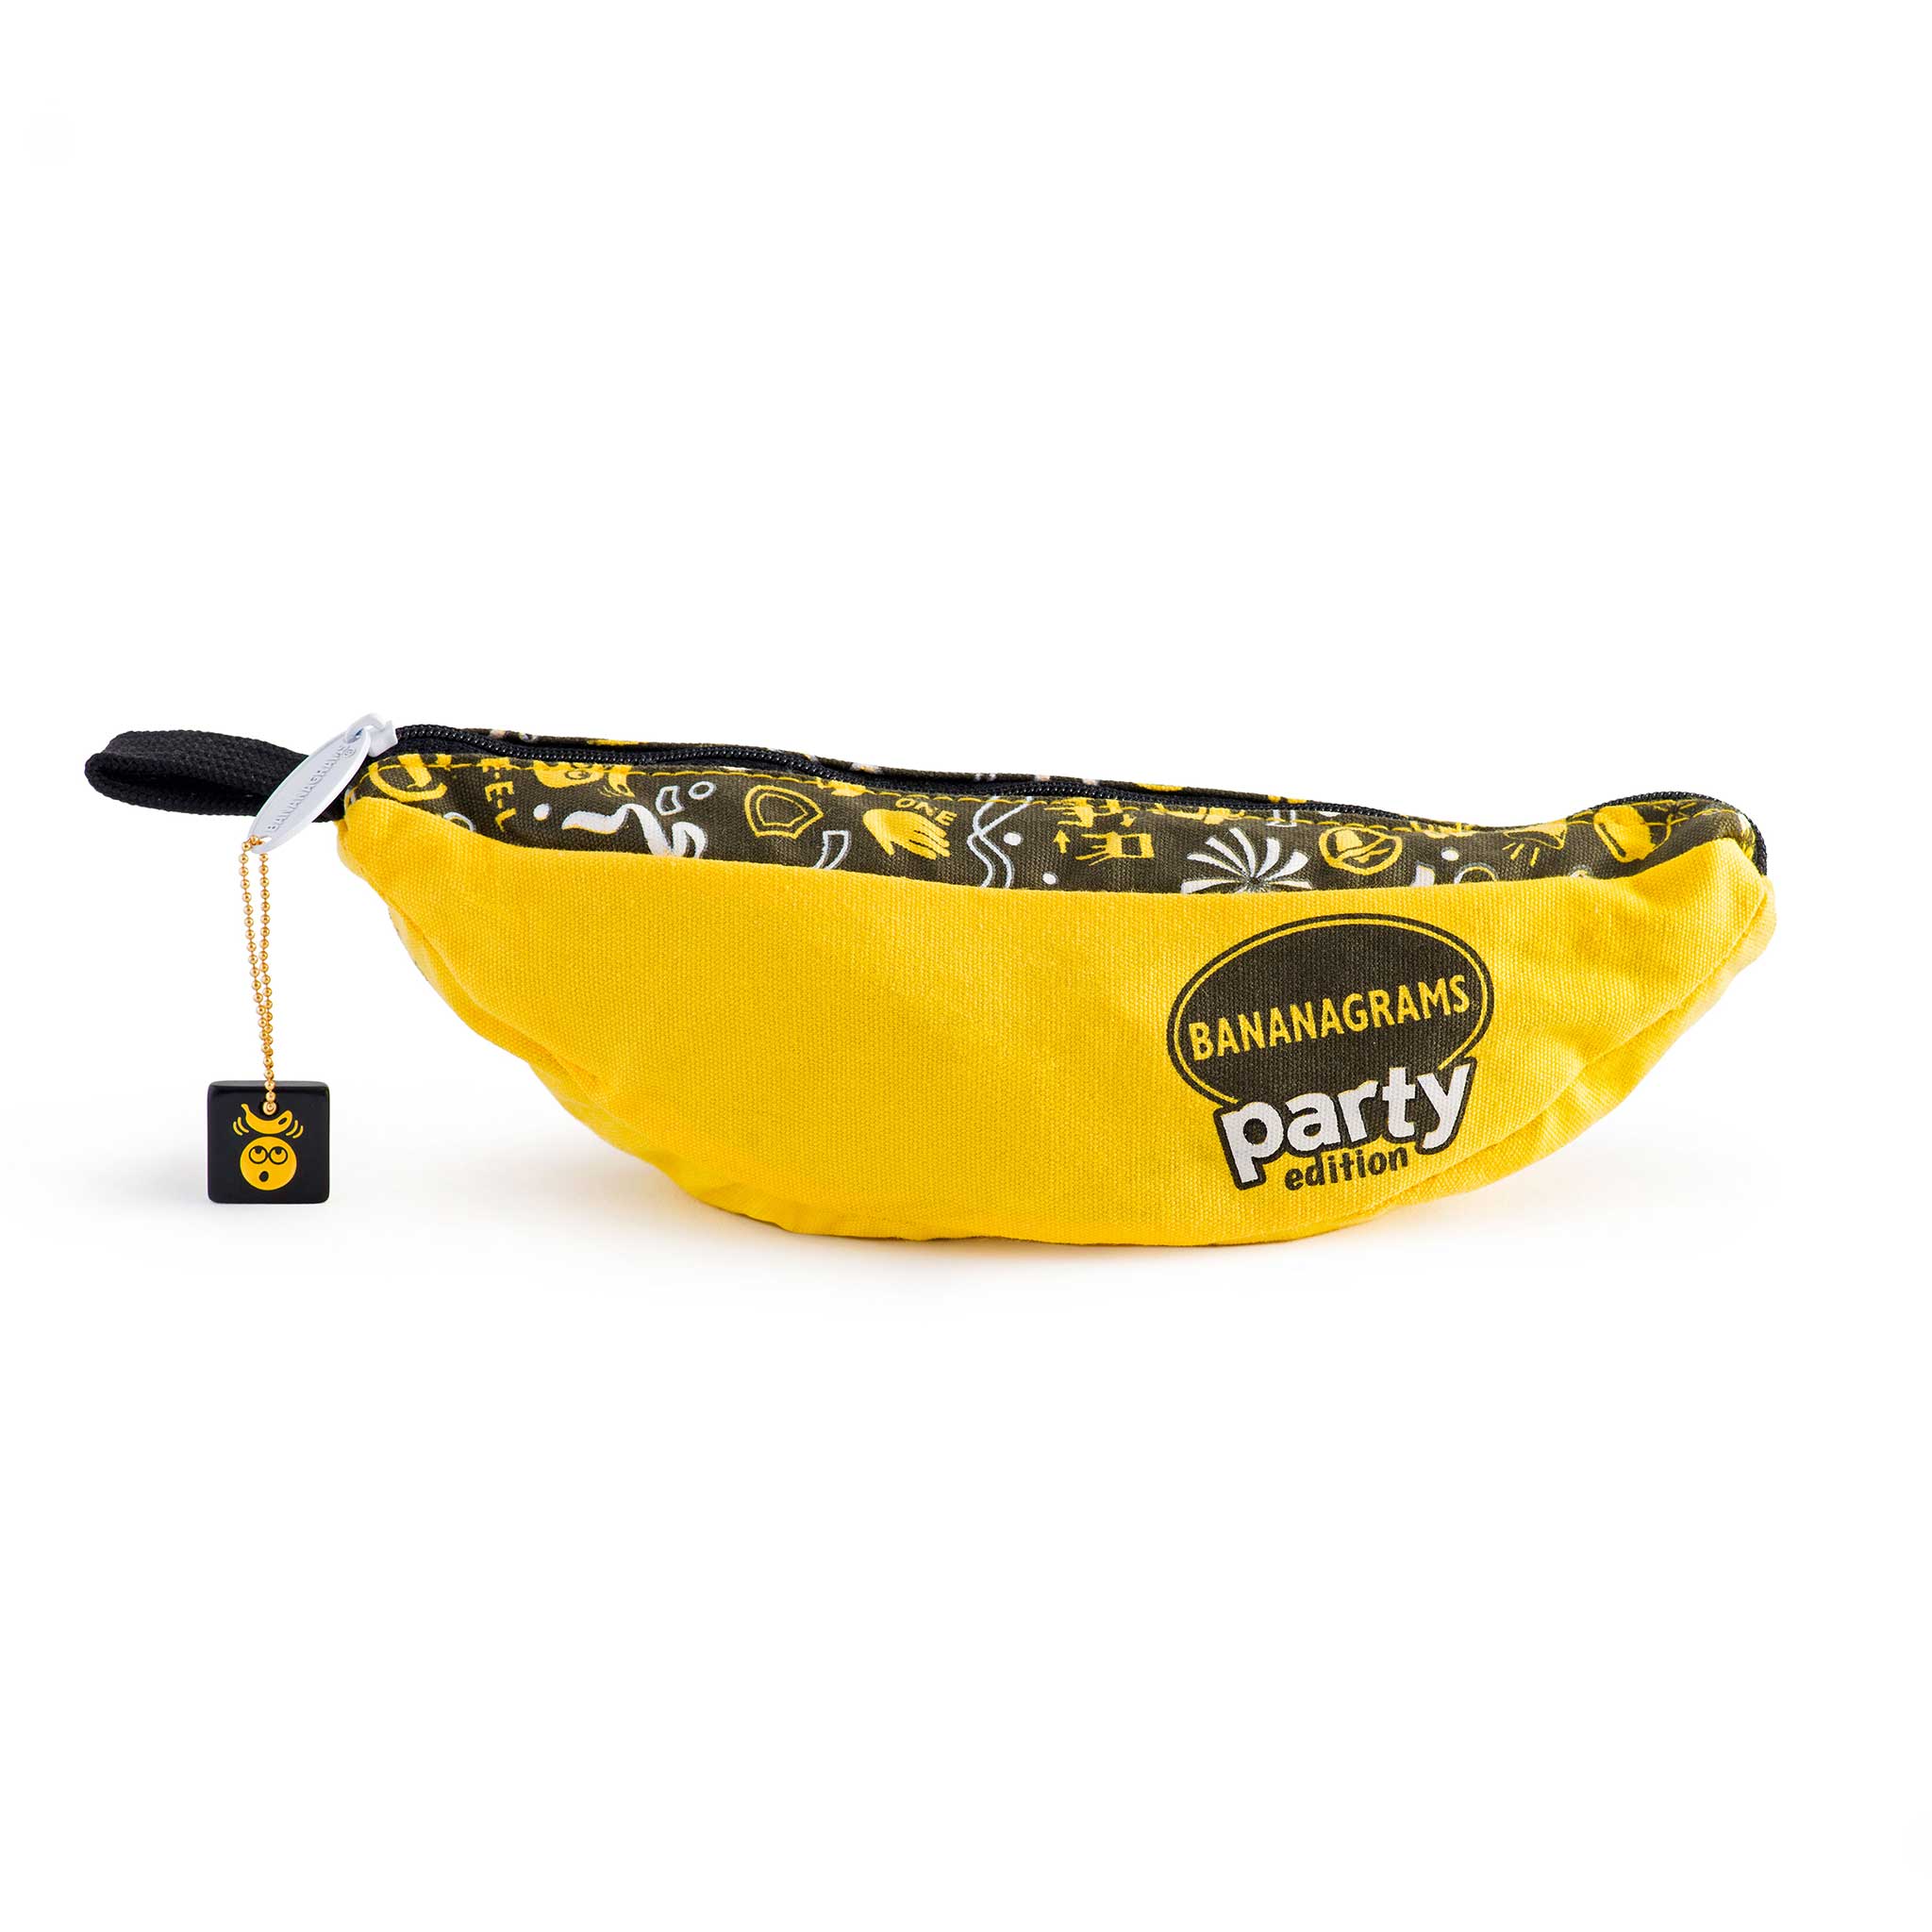 BANANANINA - Level up your Monogram game with this treasure